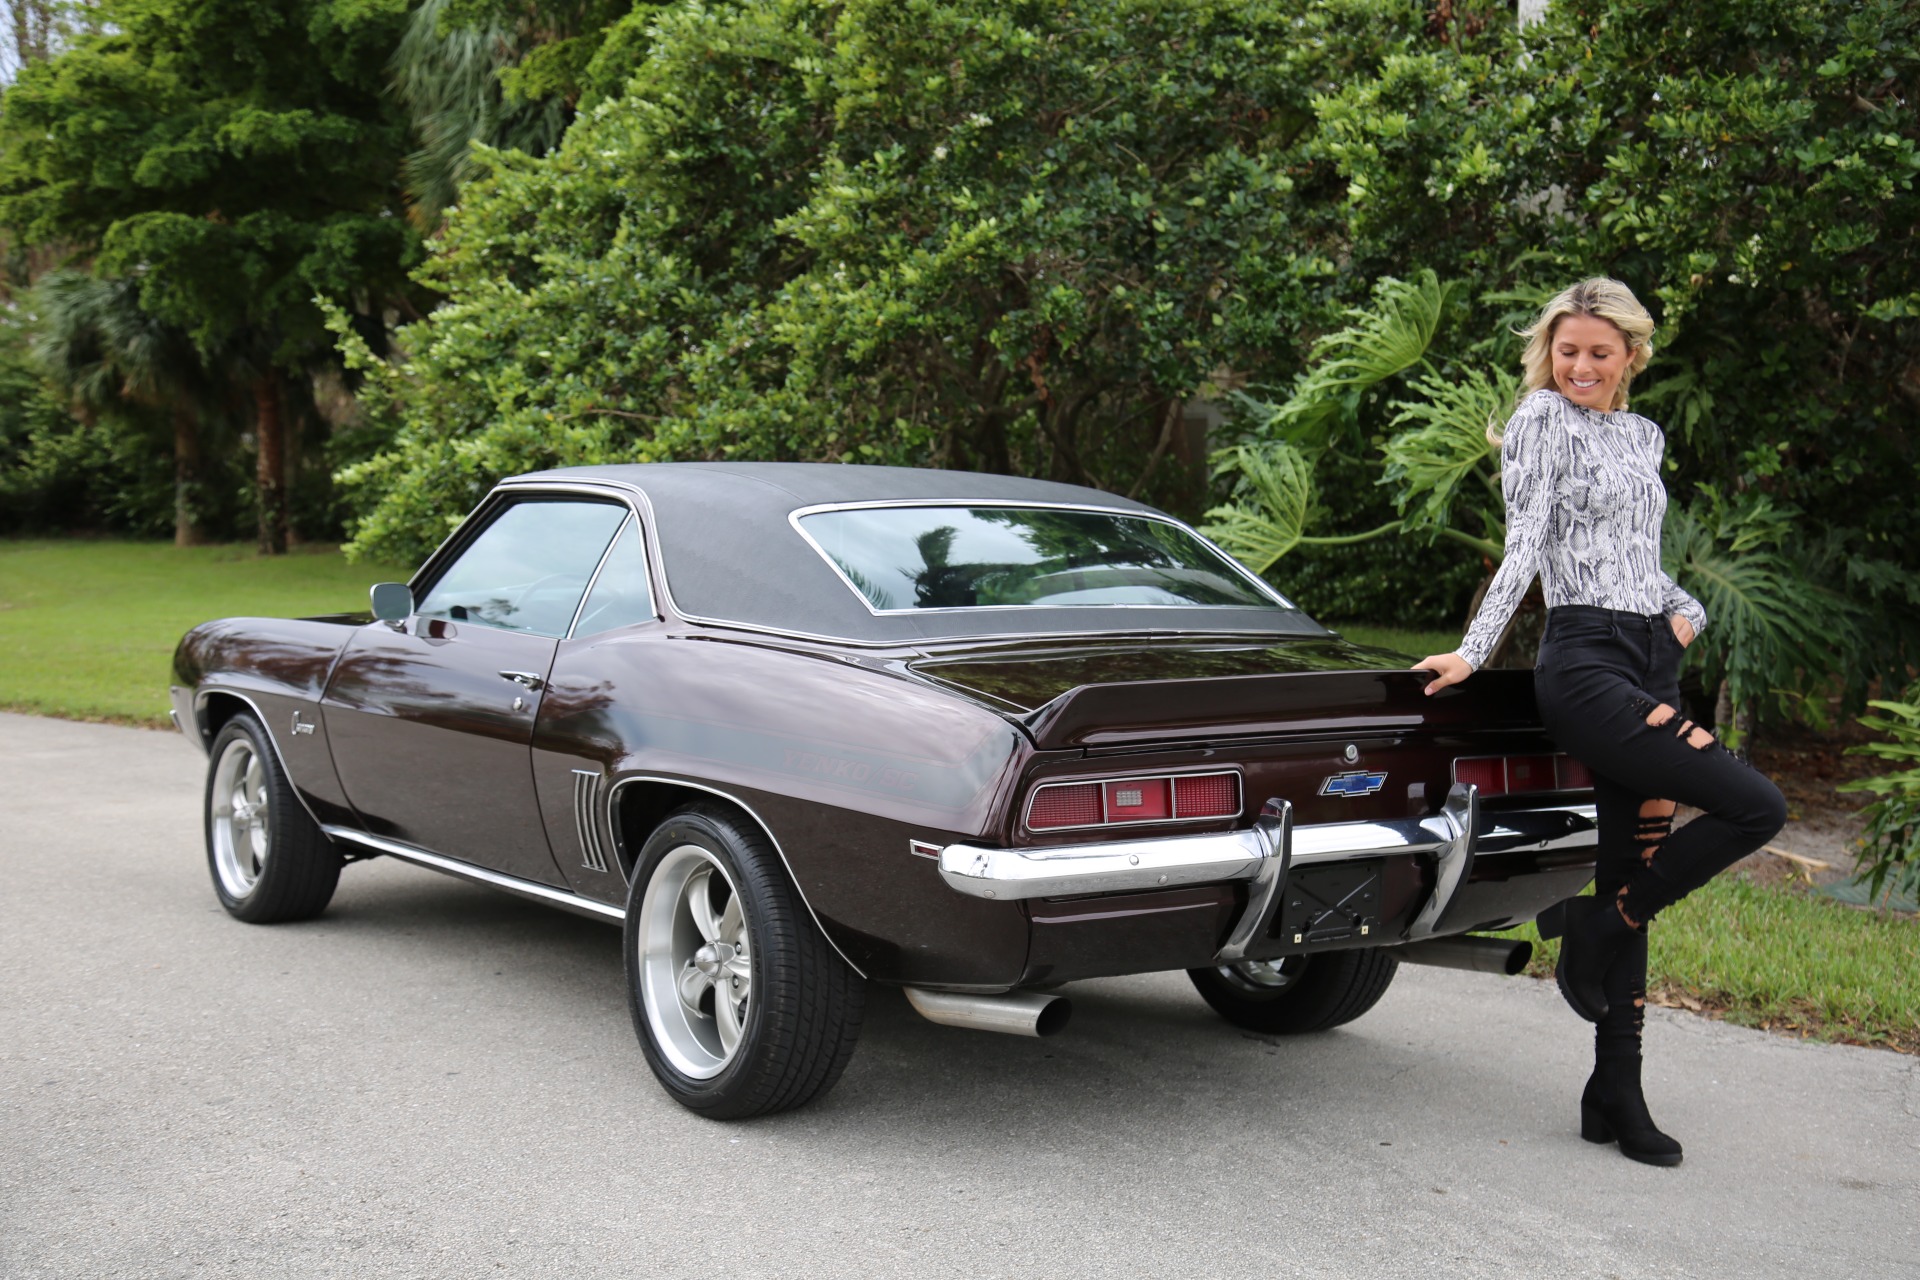 Used 1969 Chevrolet Camaro V8 4 Speed Manual for sale $47,000 at Muscle Cars for Sale Inc. in Fort Myers FL 33912 6